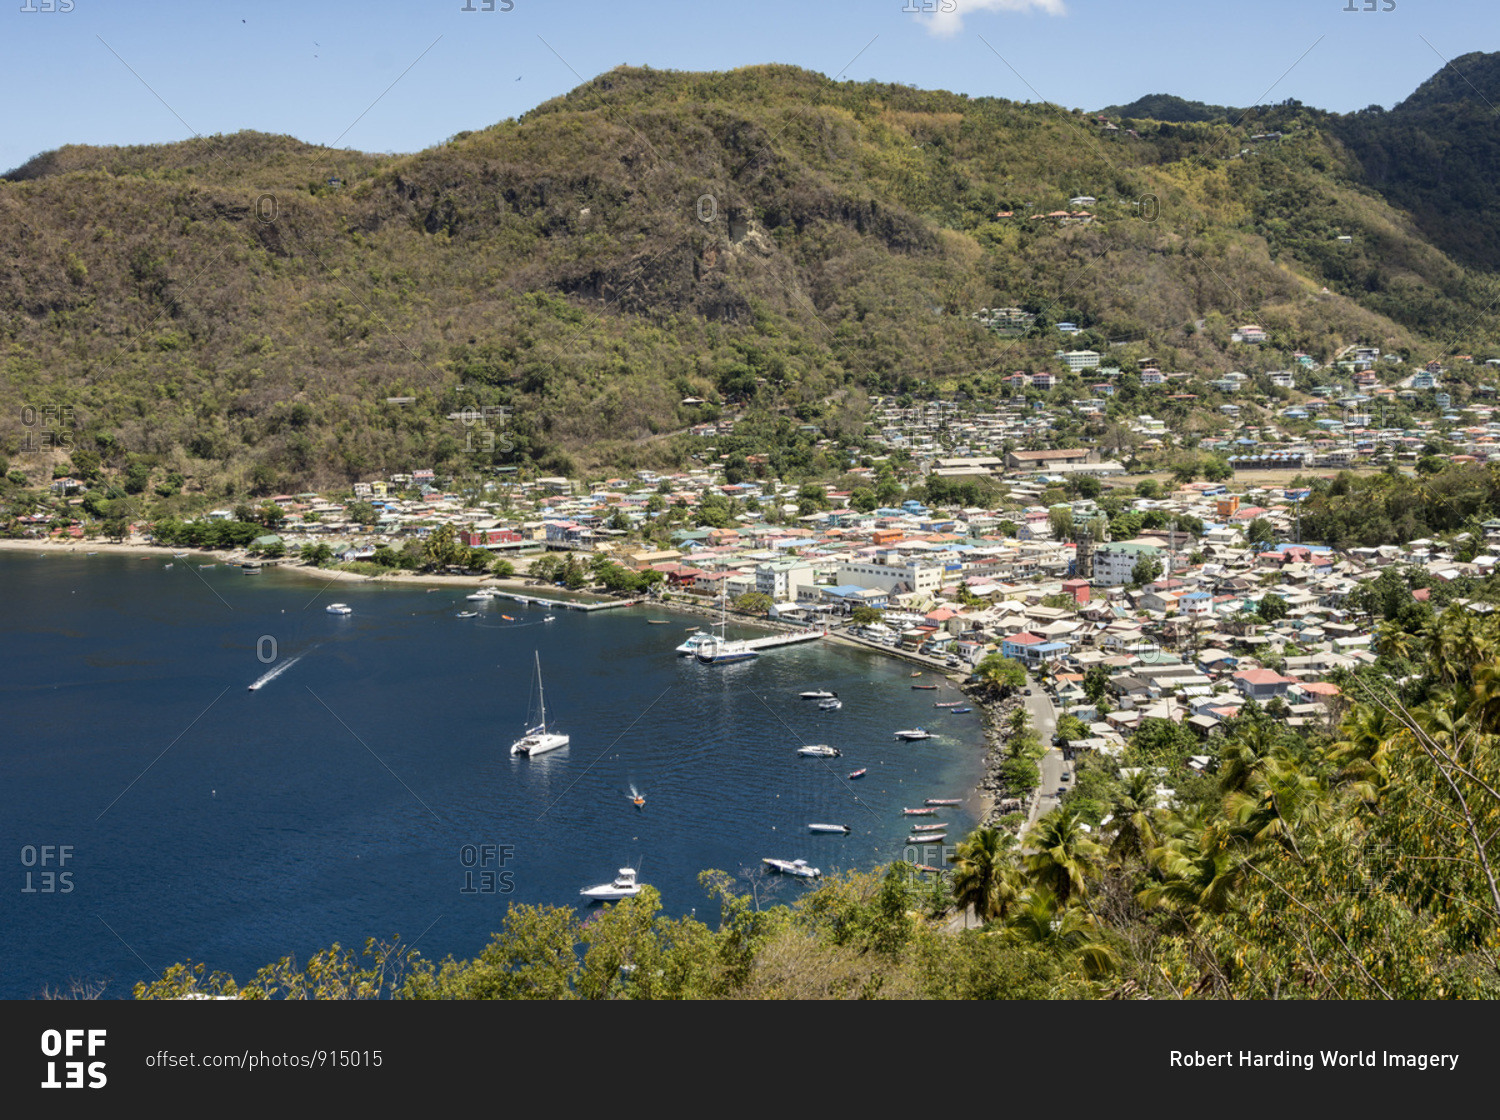 Town of Soufriere, Caribbean island of St. Lucia, Windward Islands, West Indies, Caribbean, Central America